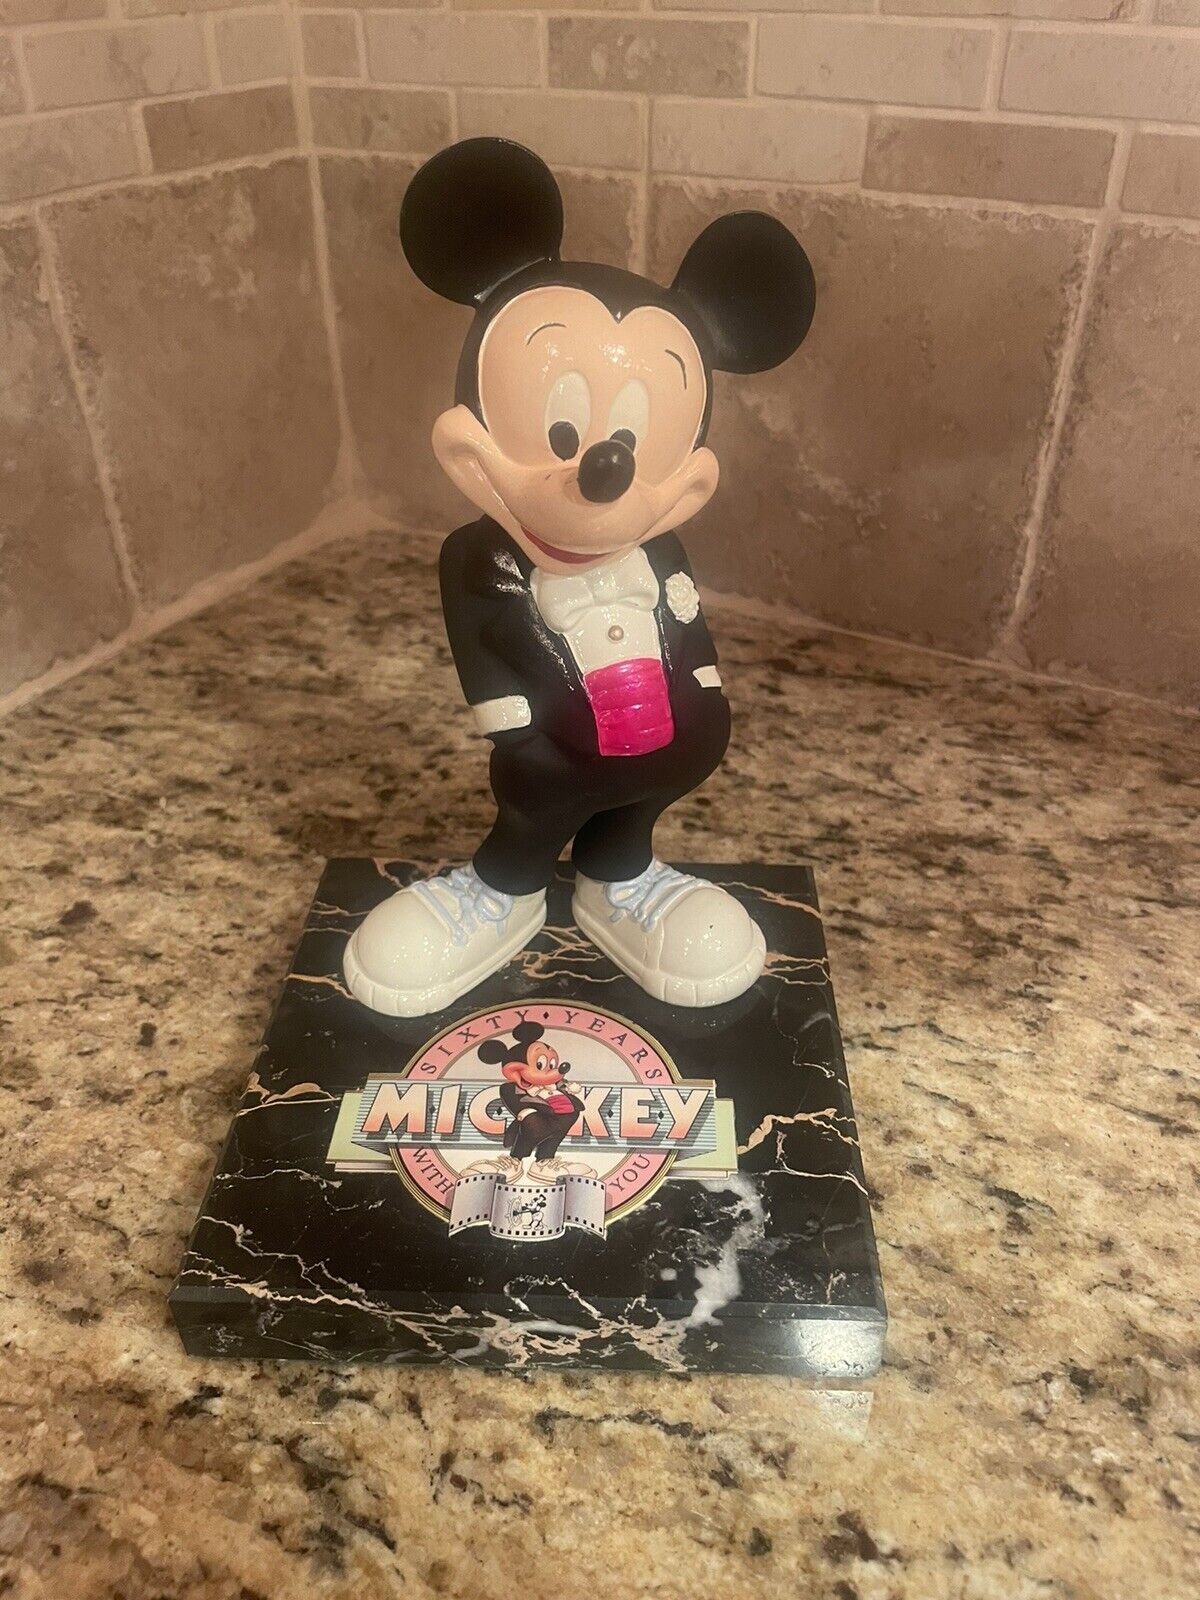 Pride Lines Limited 1988 Mickey Mouse 60th Birthday Figurine. New Old Stock